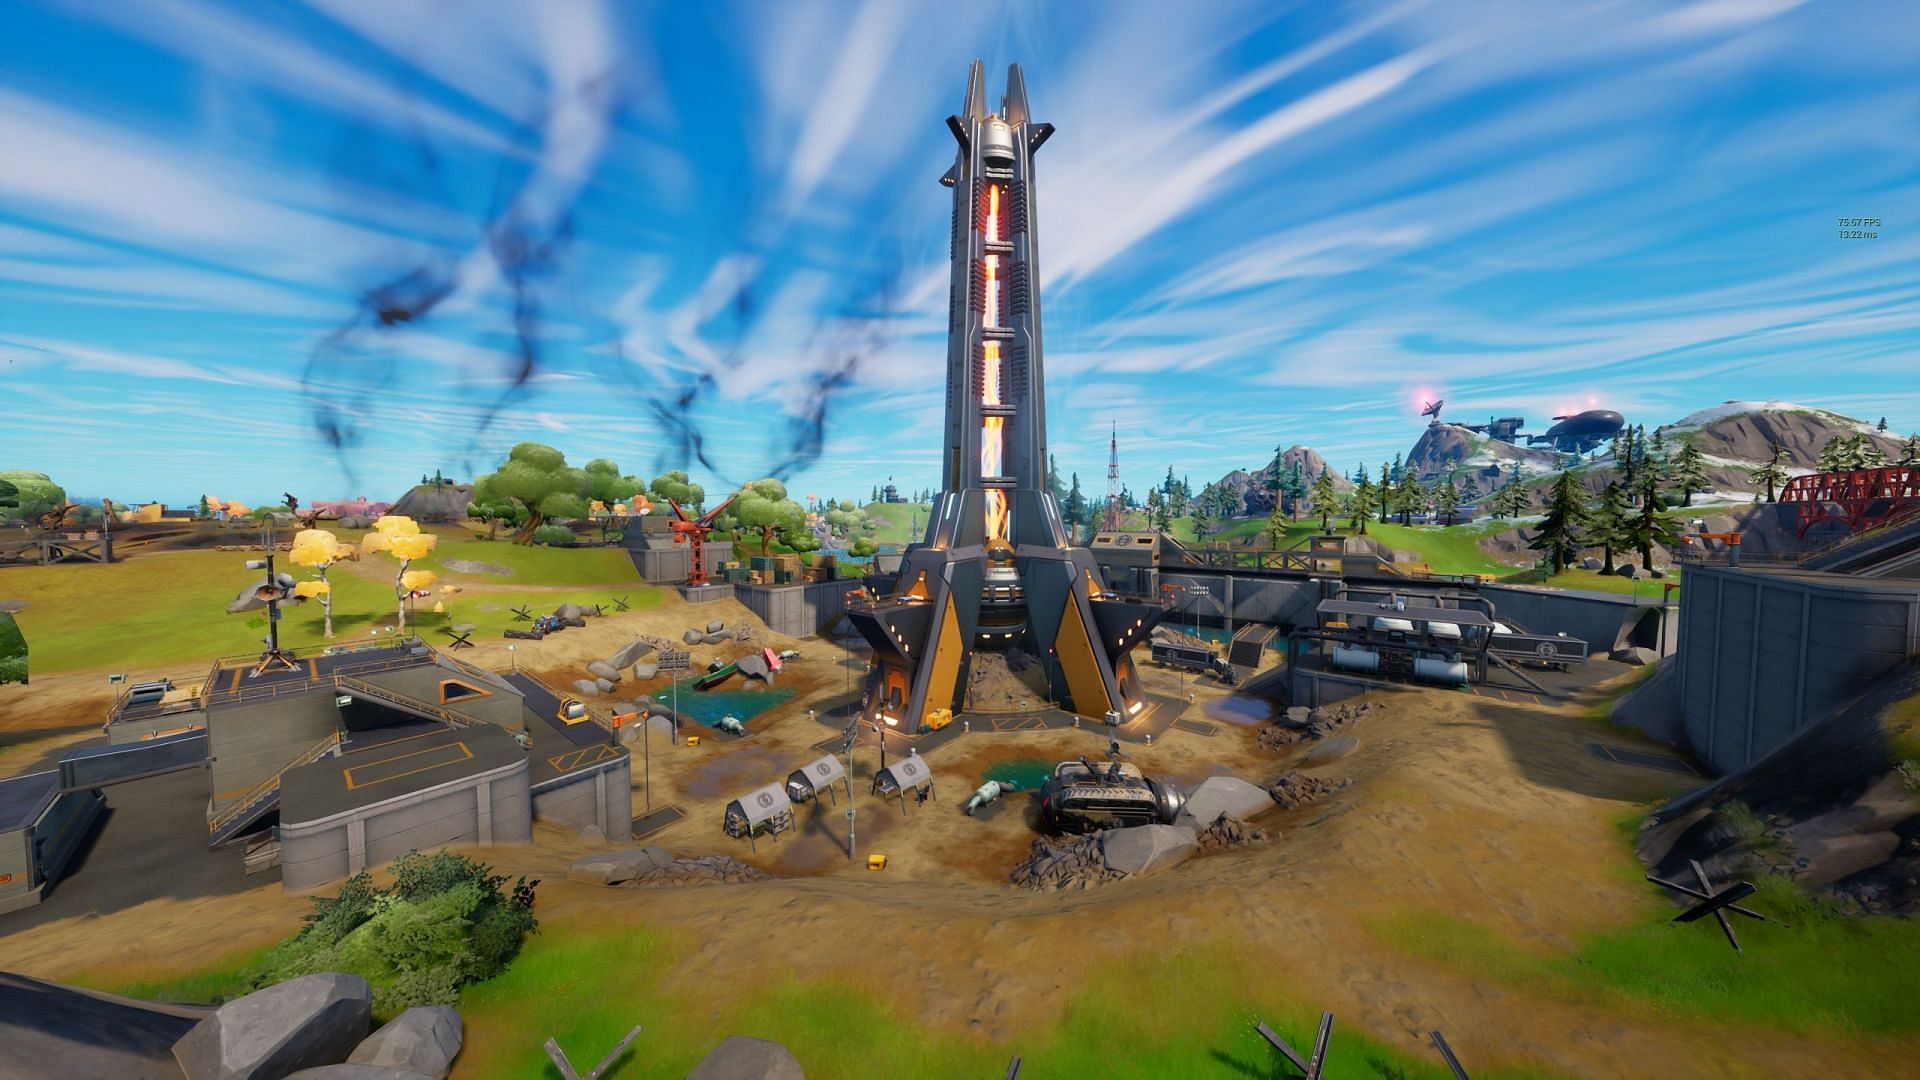 The next Fortnite update may add another live event to reveal the storyline (Image via Epic Games)